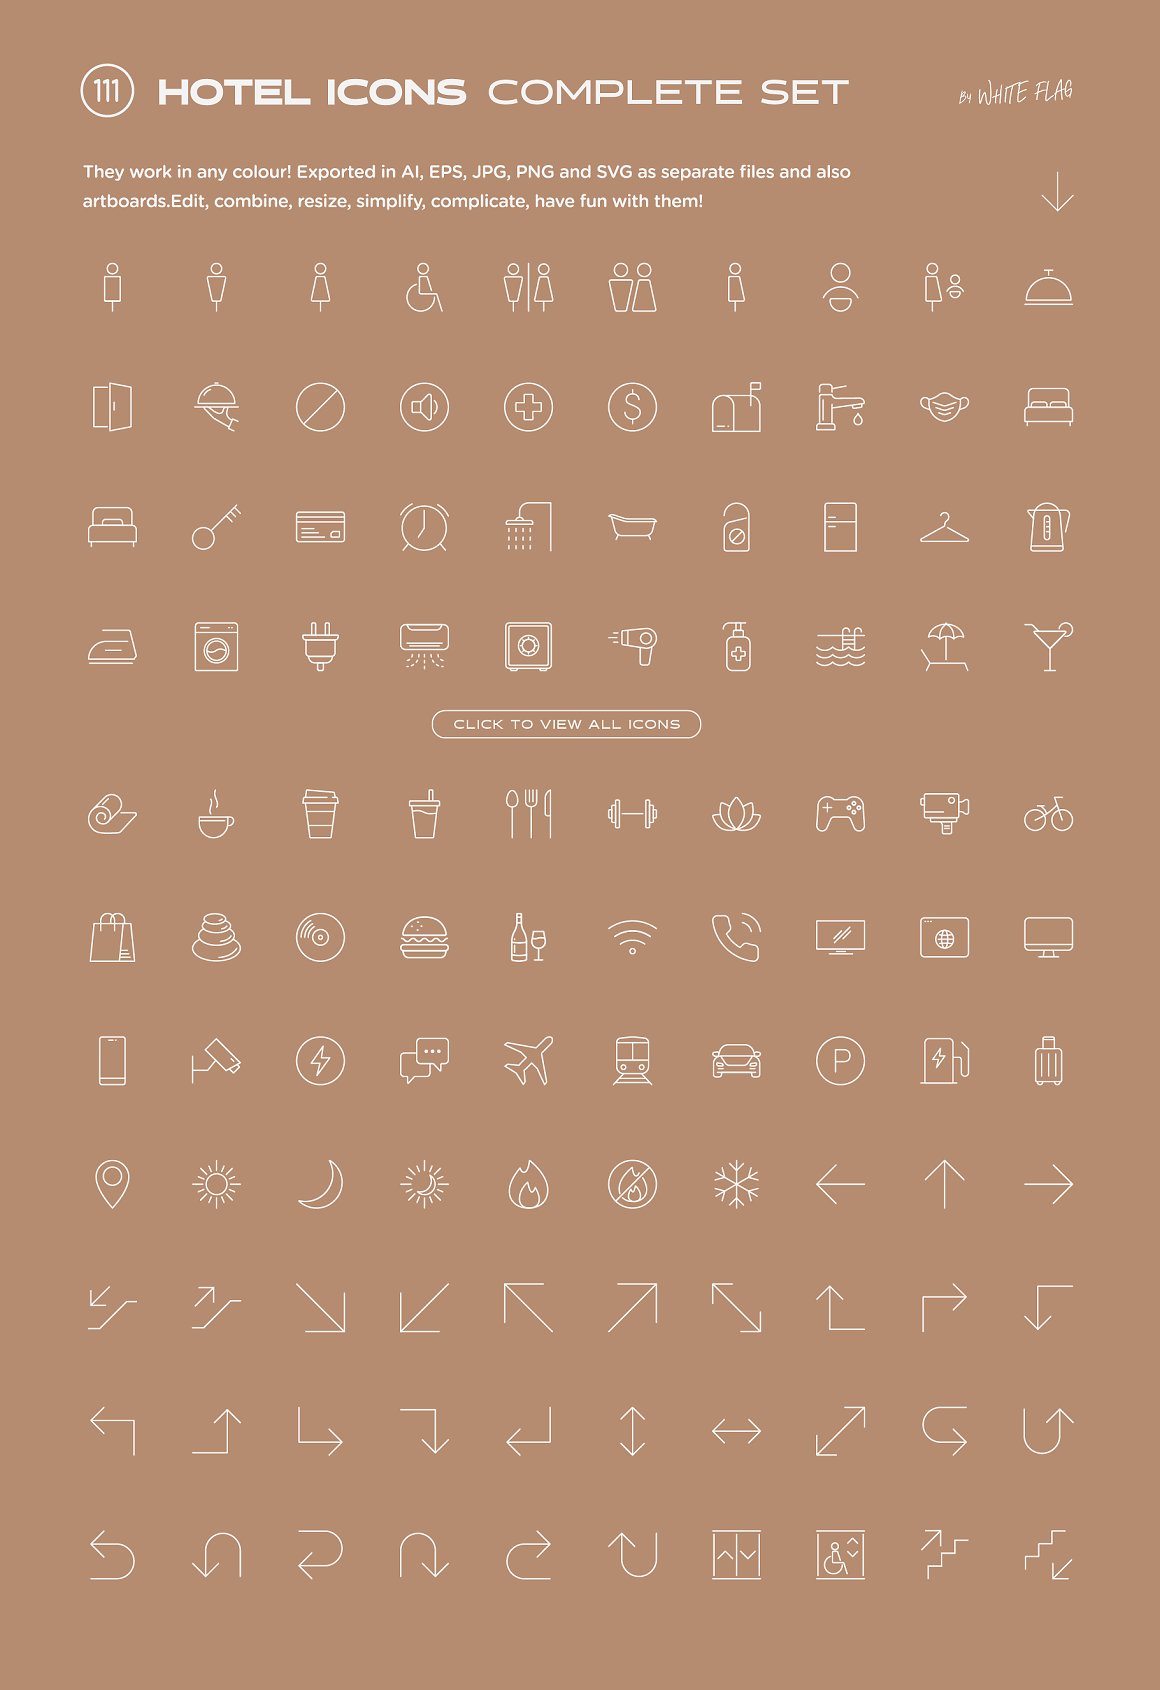 White clipart of different hotel icons on a beige background.